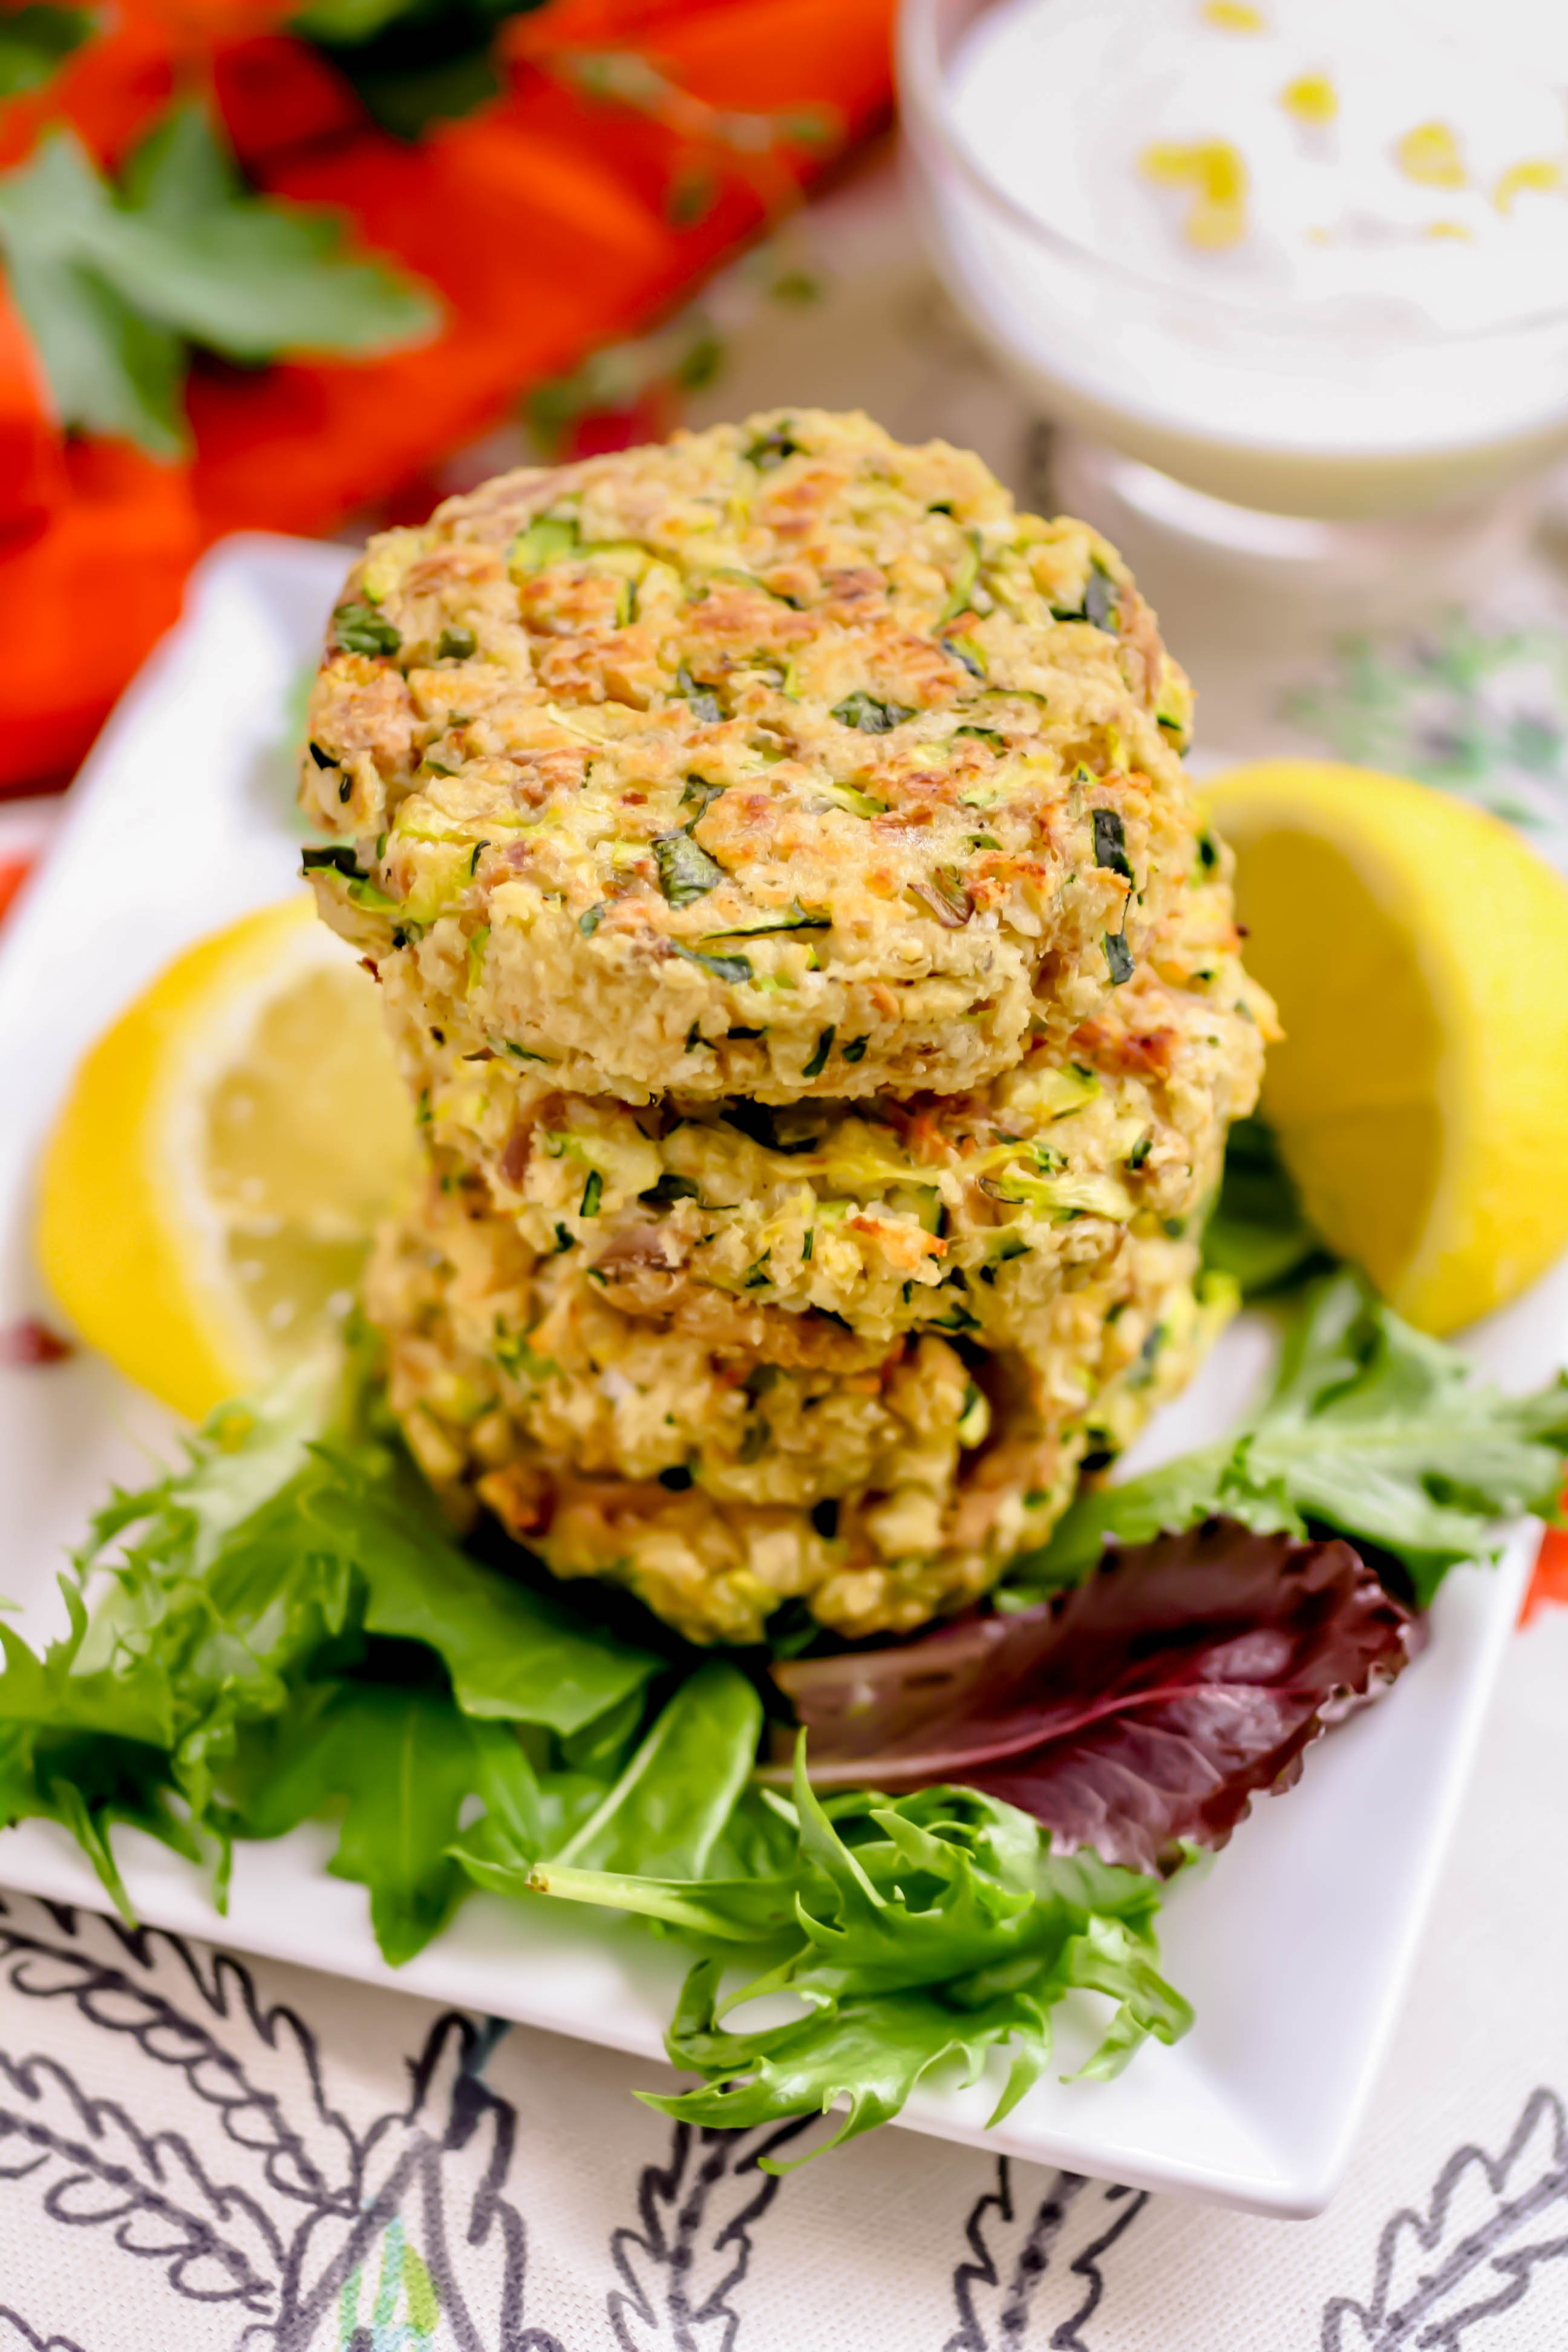 Baked Tuna and Zucchini Cakes with Lemon-Yogurt Dressing are fabulous snacks for springtime. You'll adore these healthy and tasty Baked Tuna and Zucchini Cakes with Lemon-Yogurt Dressing.